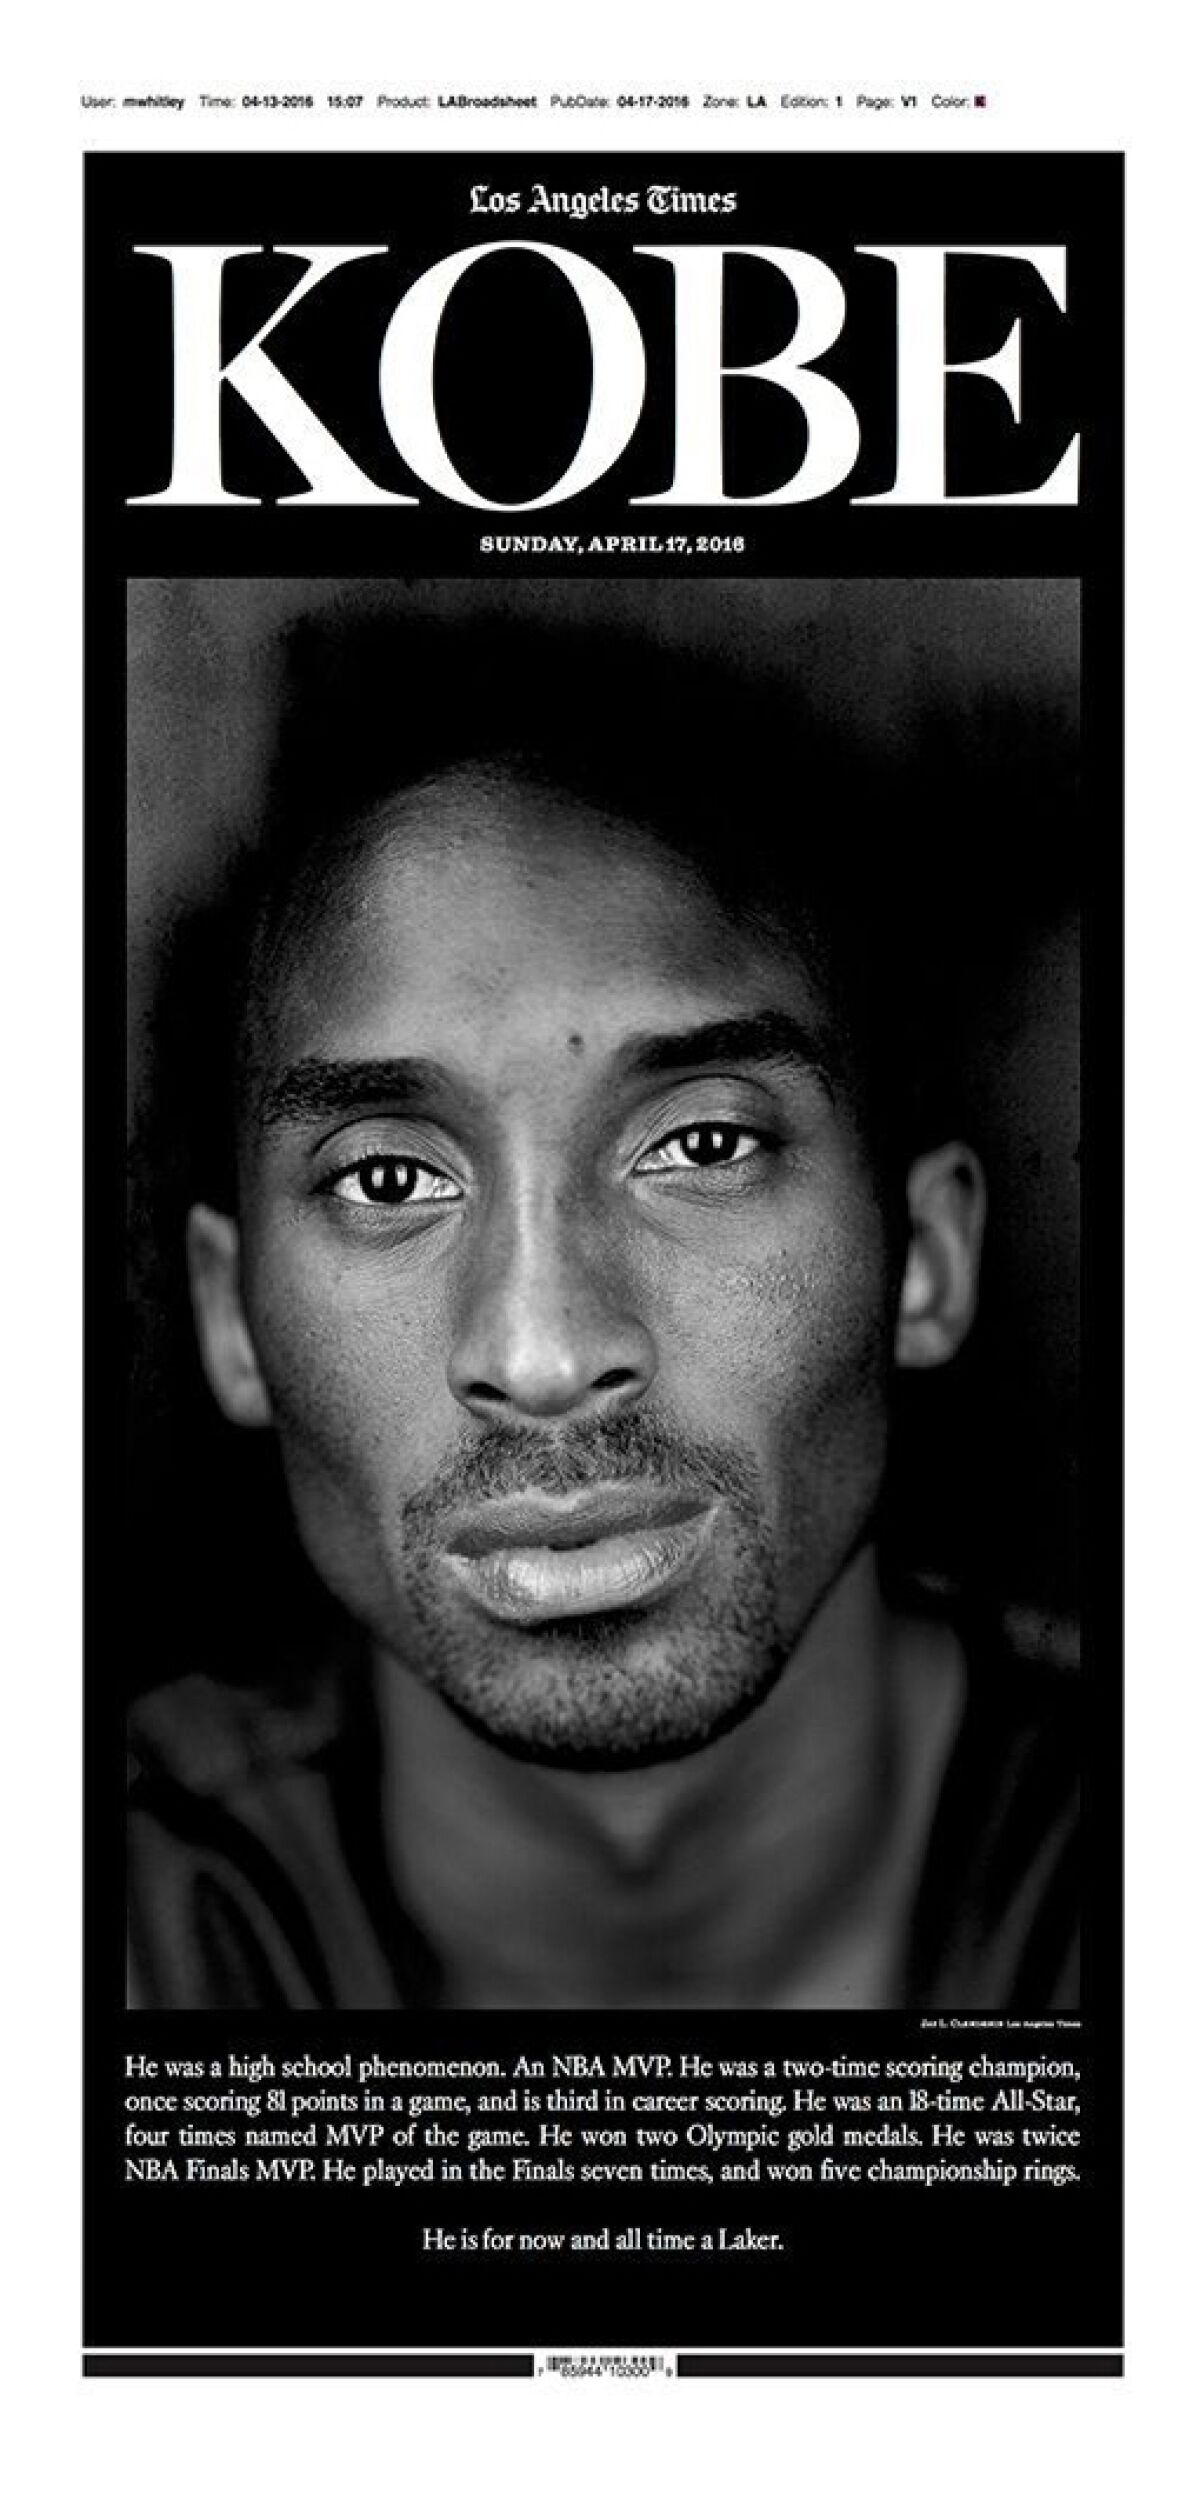 This commemorative page of a Special Section of the L.A. Times celebrates Kobe Bryant's 20 year career in Los Angeles.